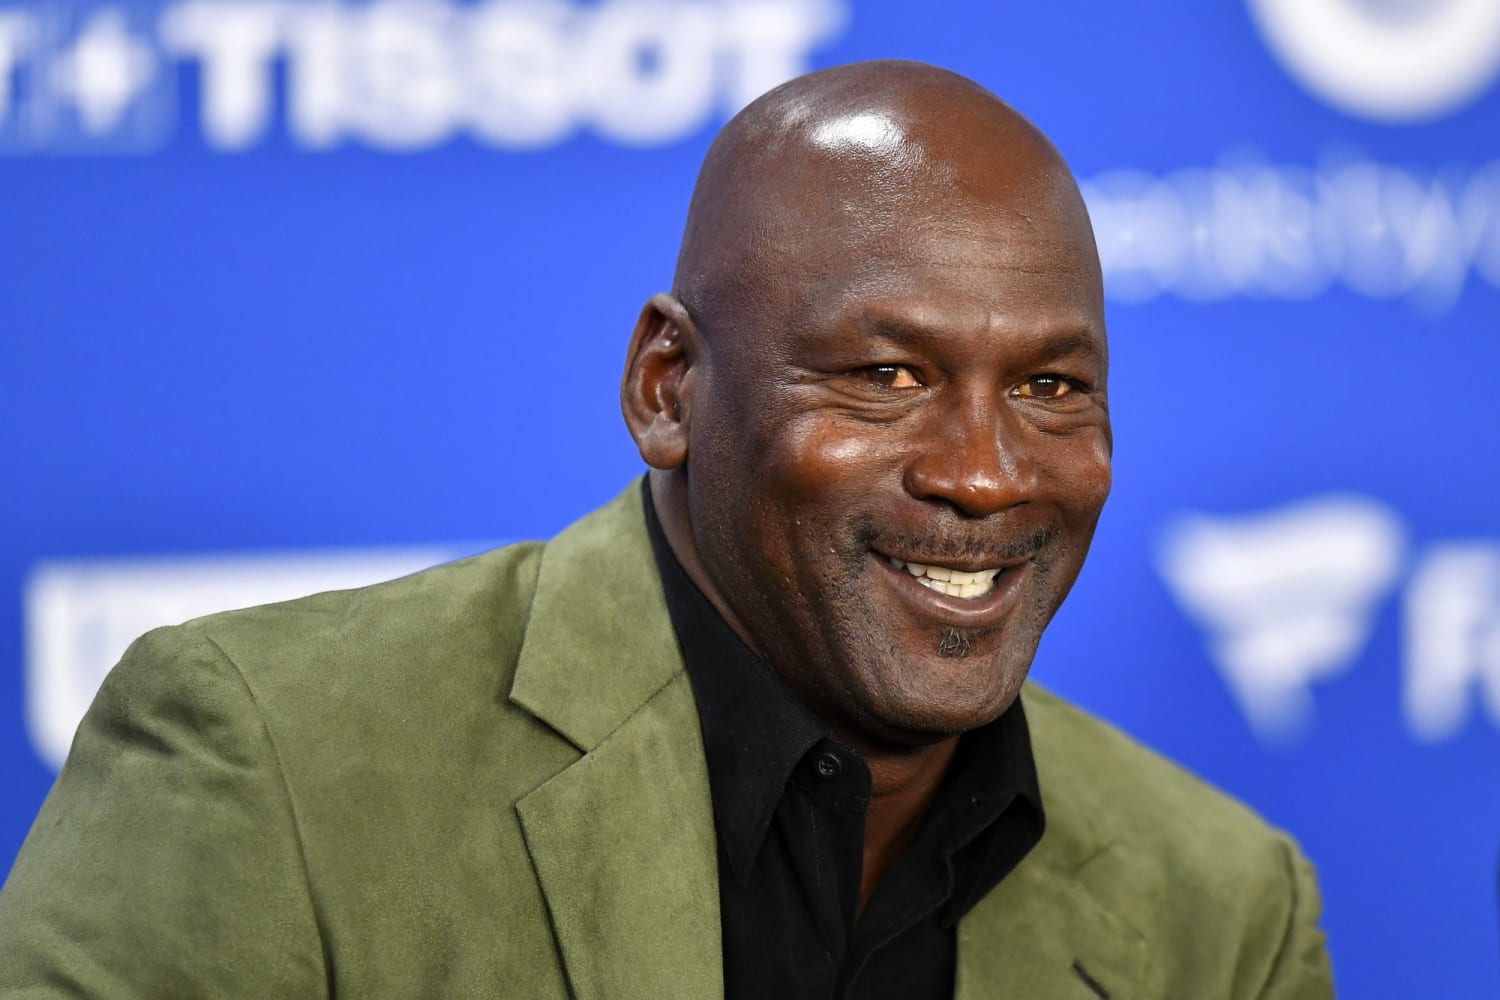 Michael Jordan Pledges to Donate $100 Million to Black Lives Matter Causes Over the Next Decade